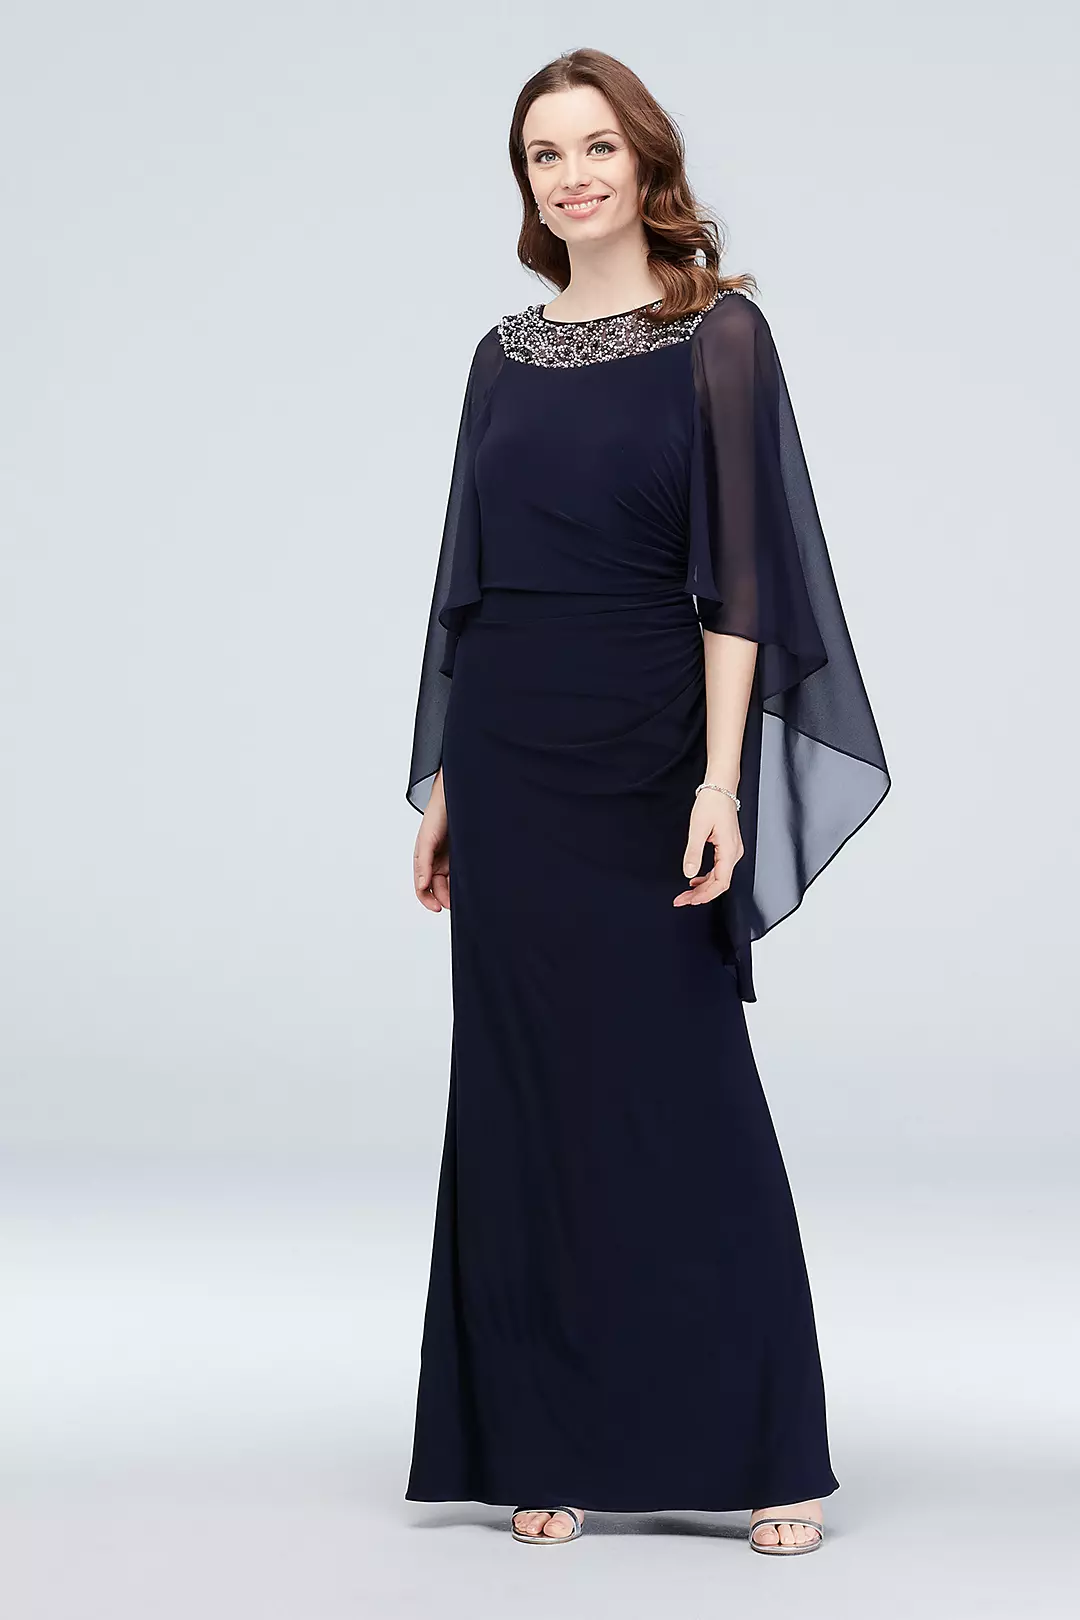 Embellished Neck Drape Sleeve Gown with Ruching Image